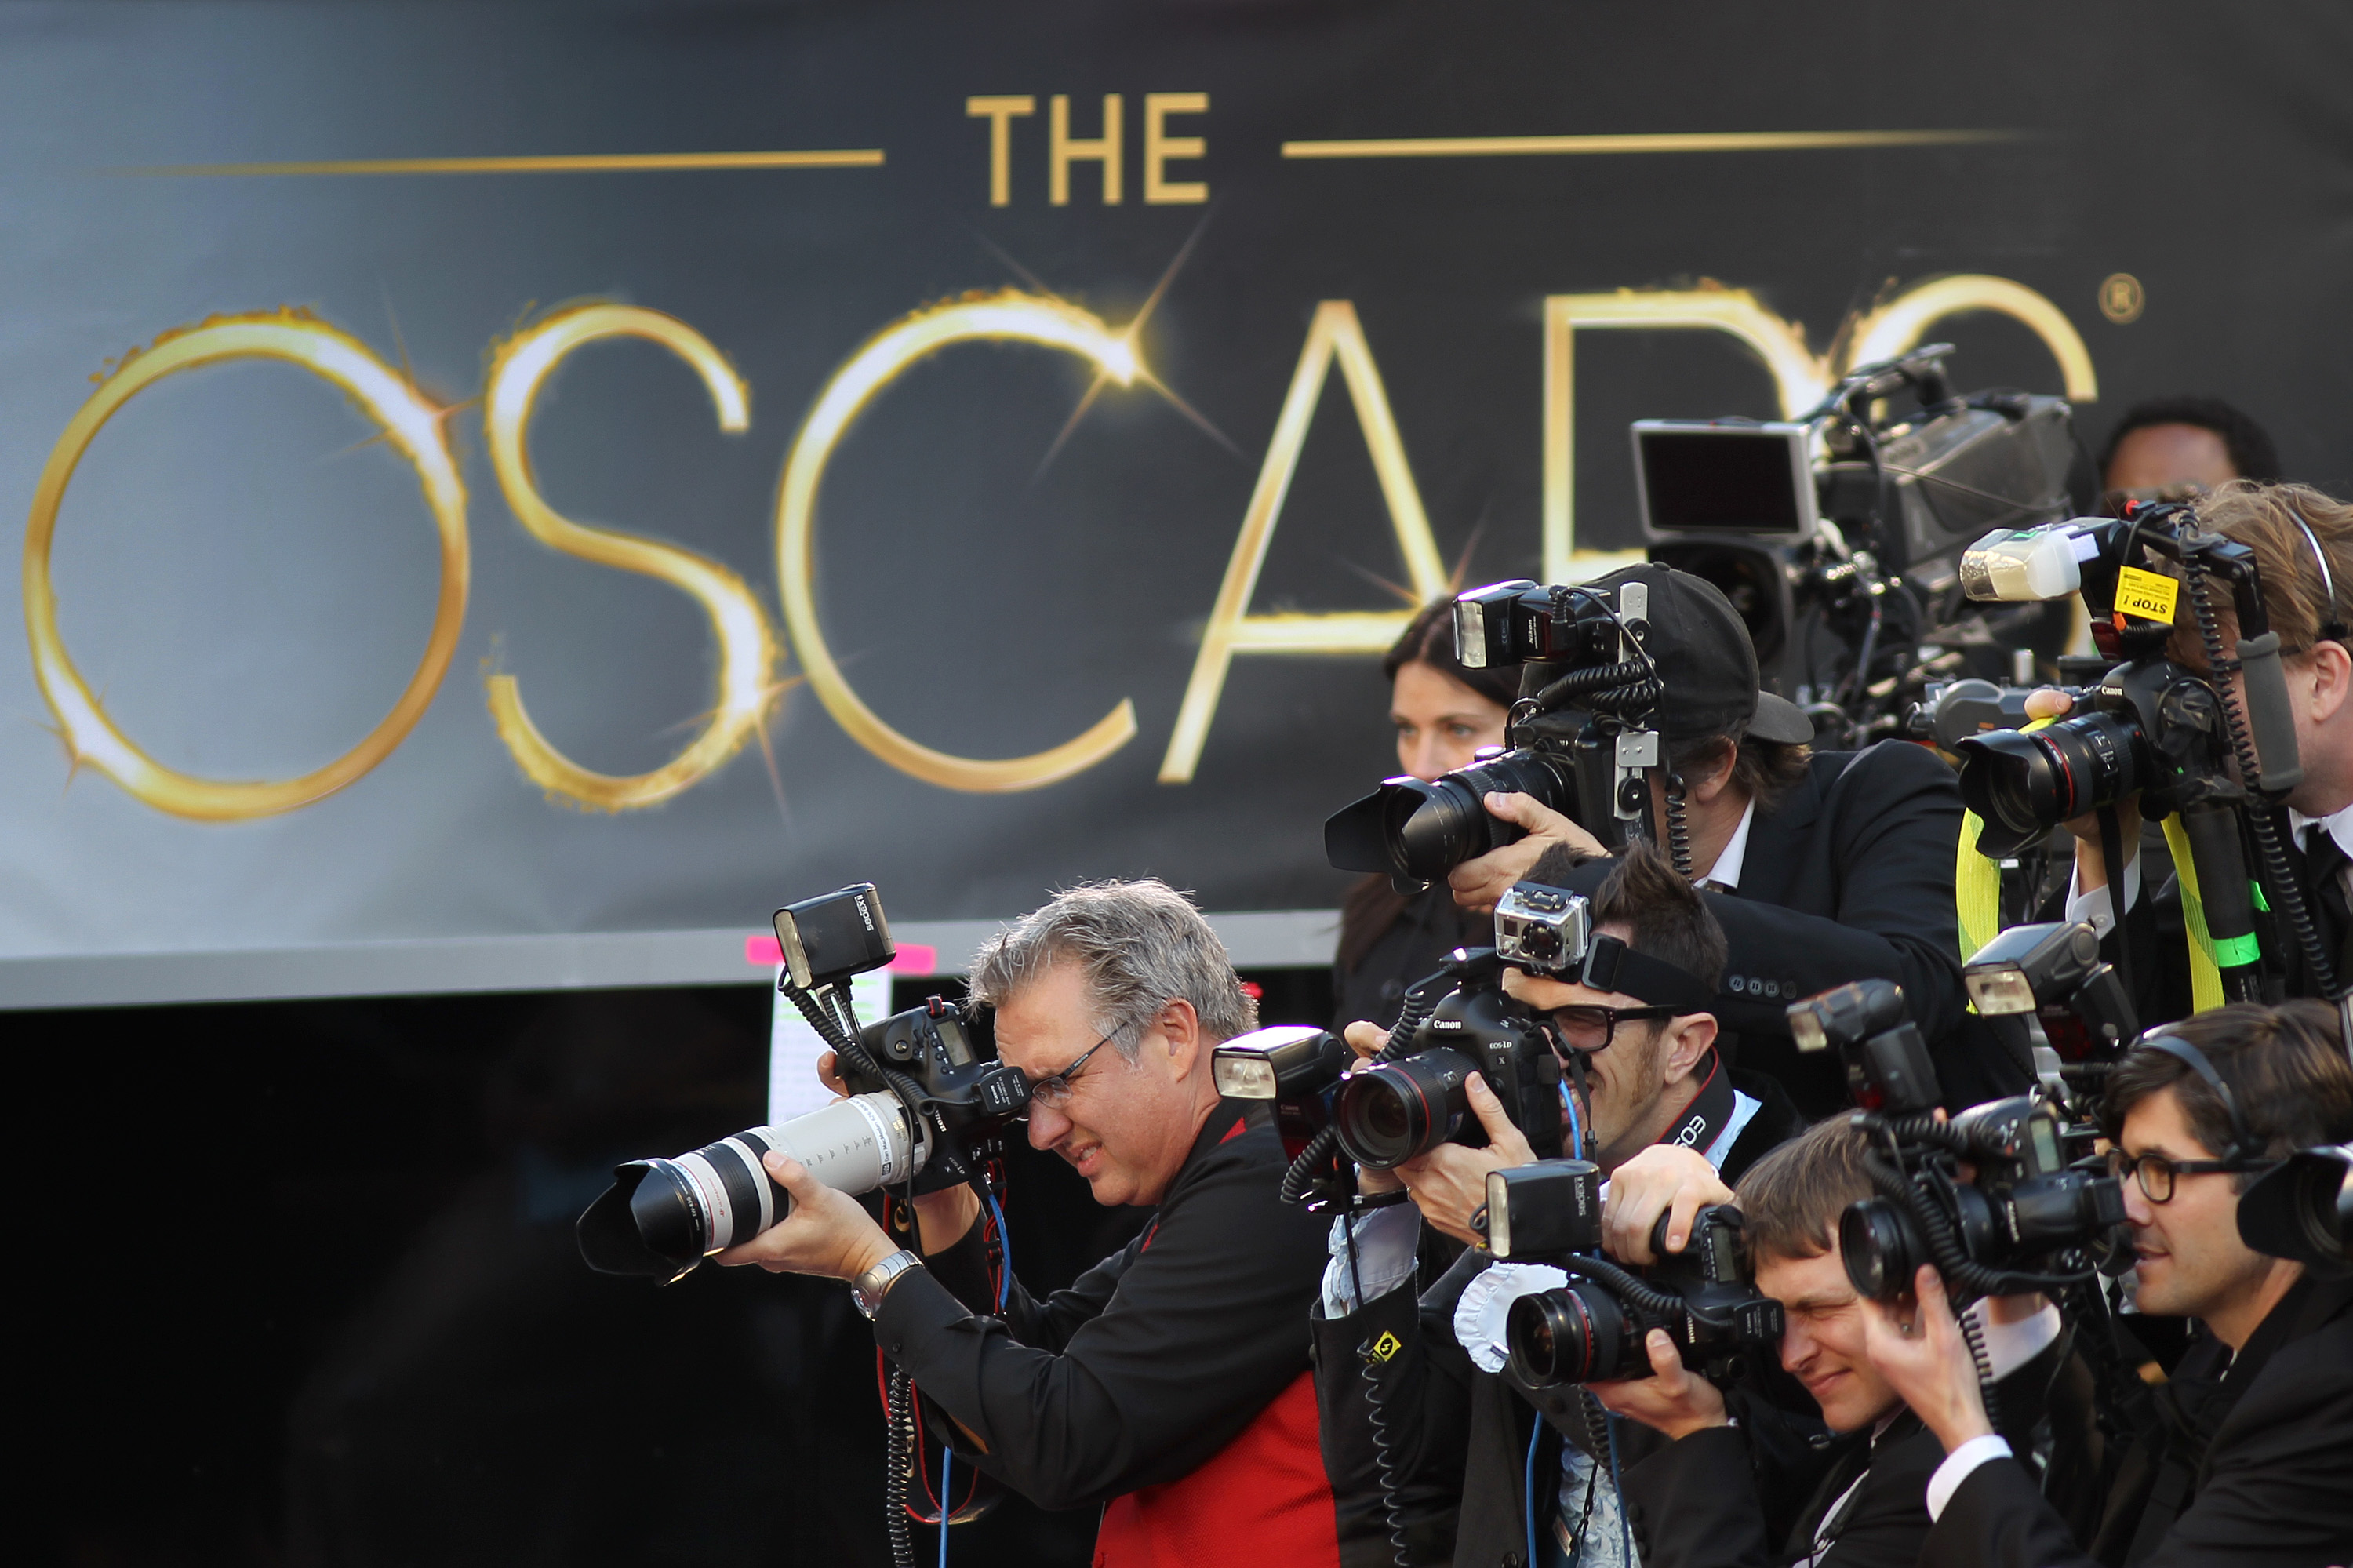 Photographers on the Oscars red carpet.